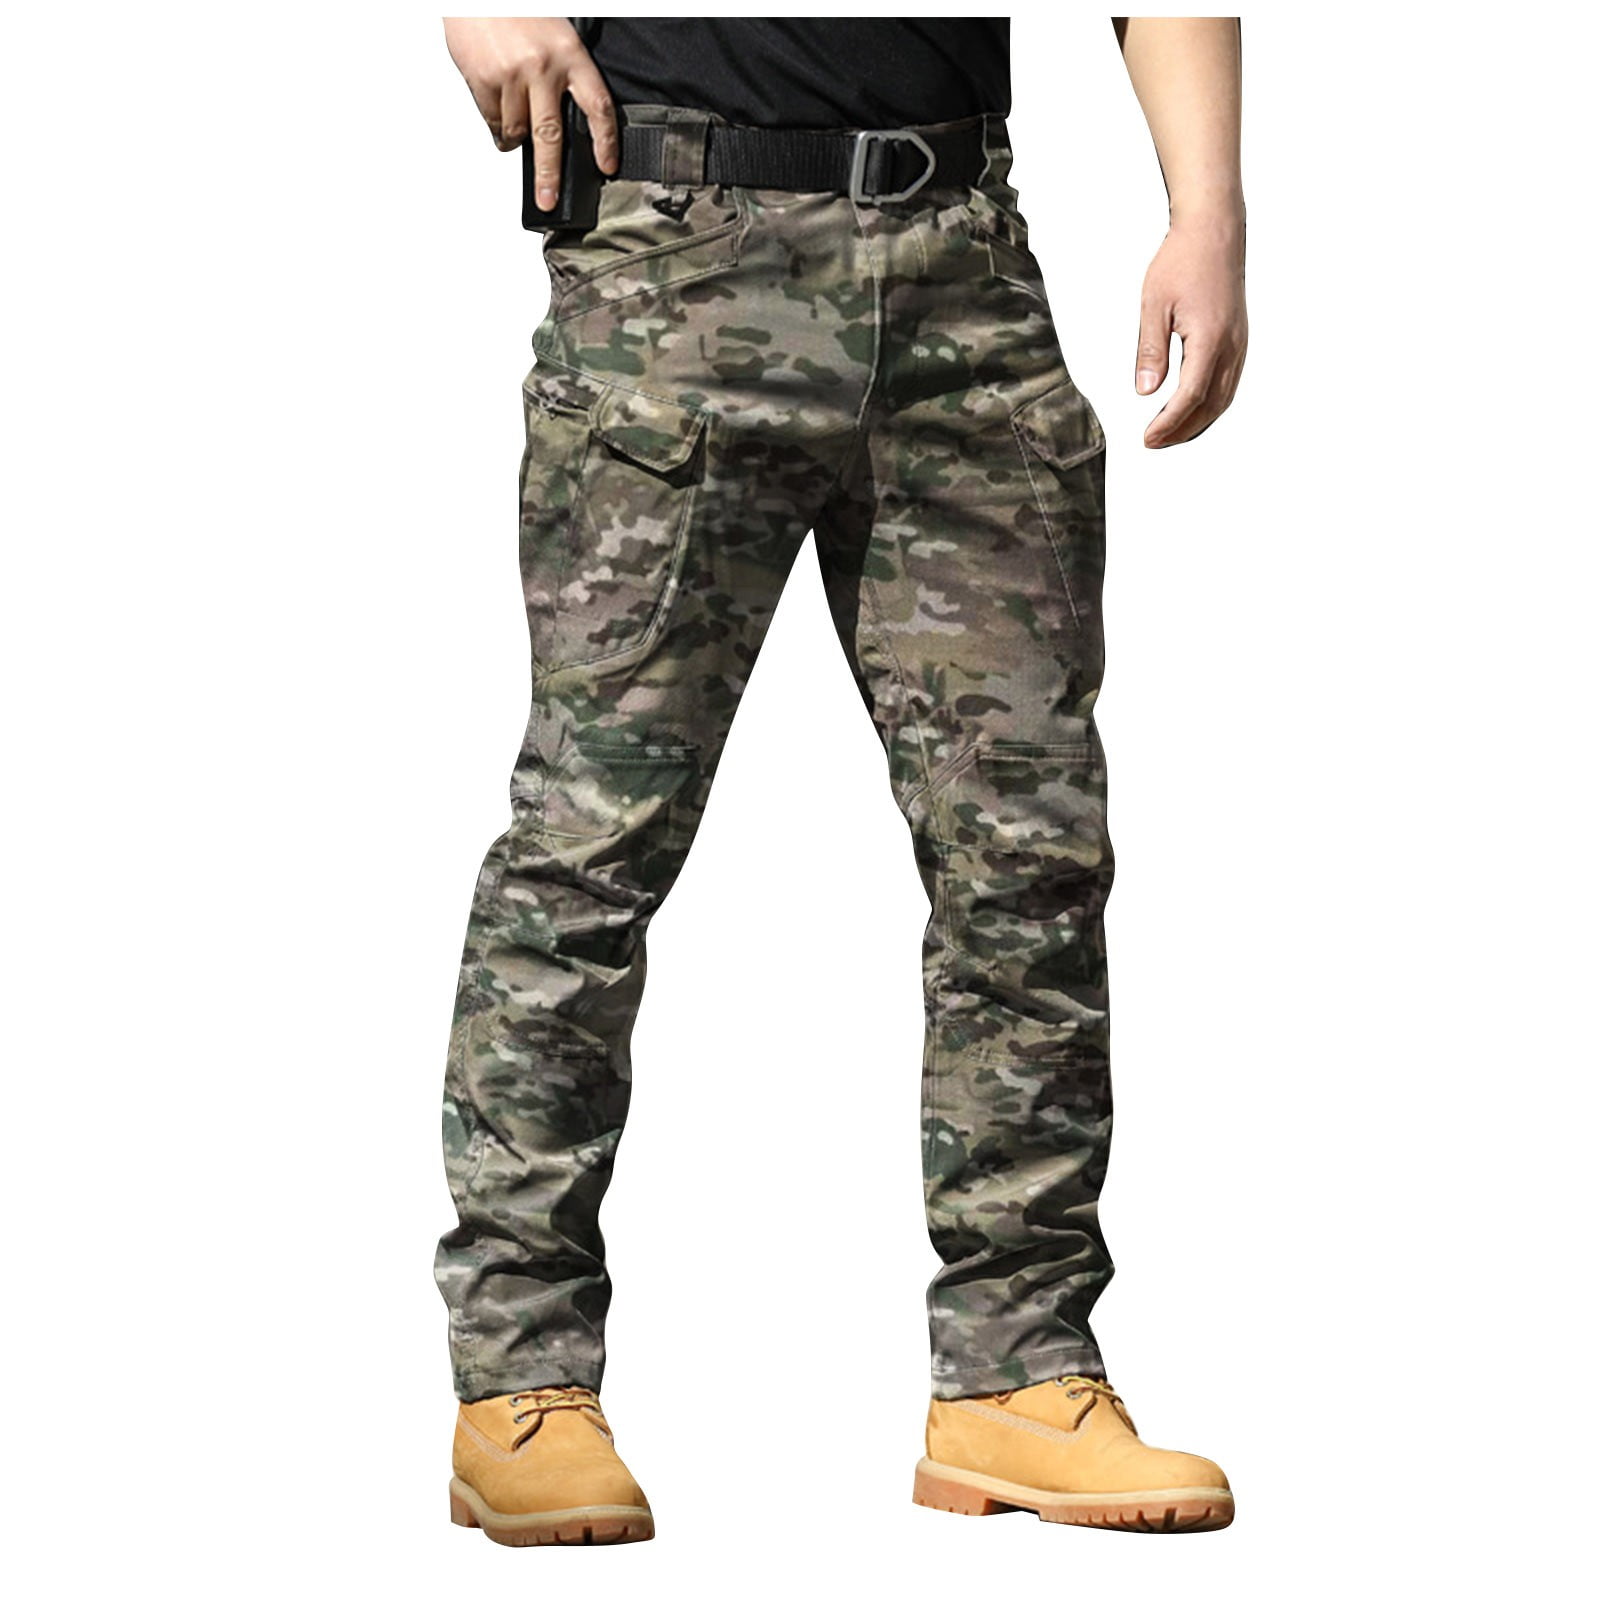 TQWQT Camo Cargo Pants for Men Relaxed Fit Cotton Casual Work Hiking Pants  Mens Tactical Military Army Pants with Multi Pockets Gray XXL 